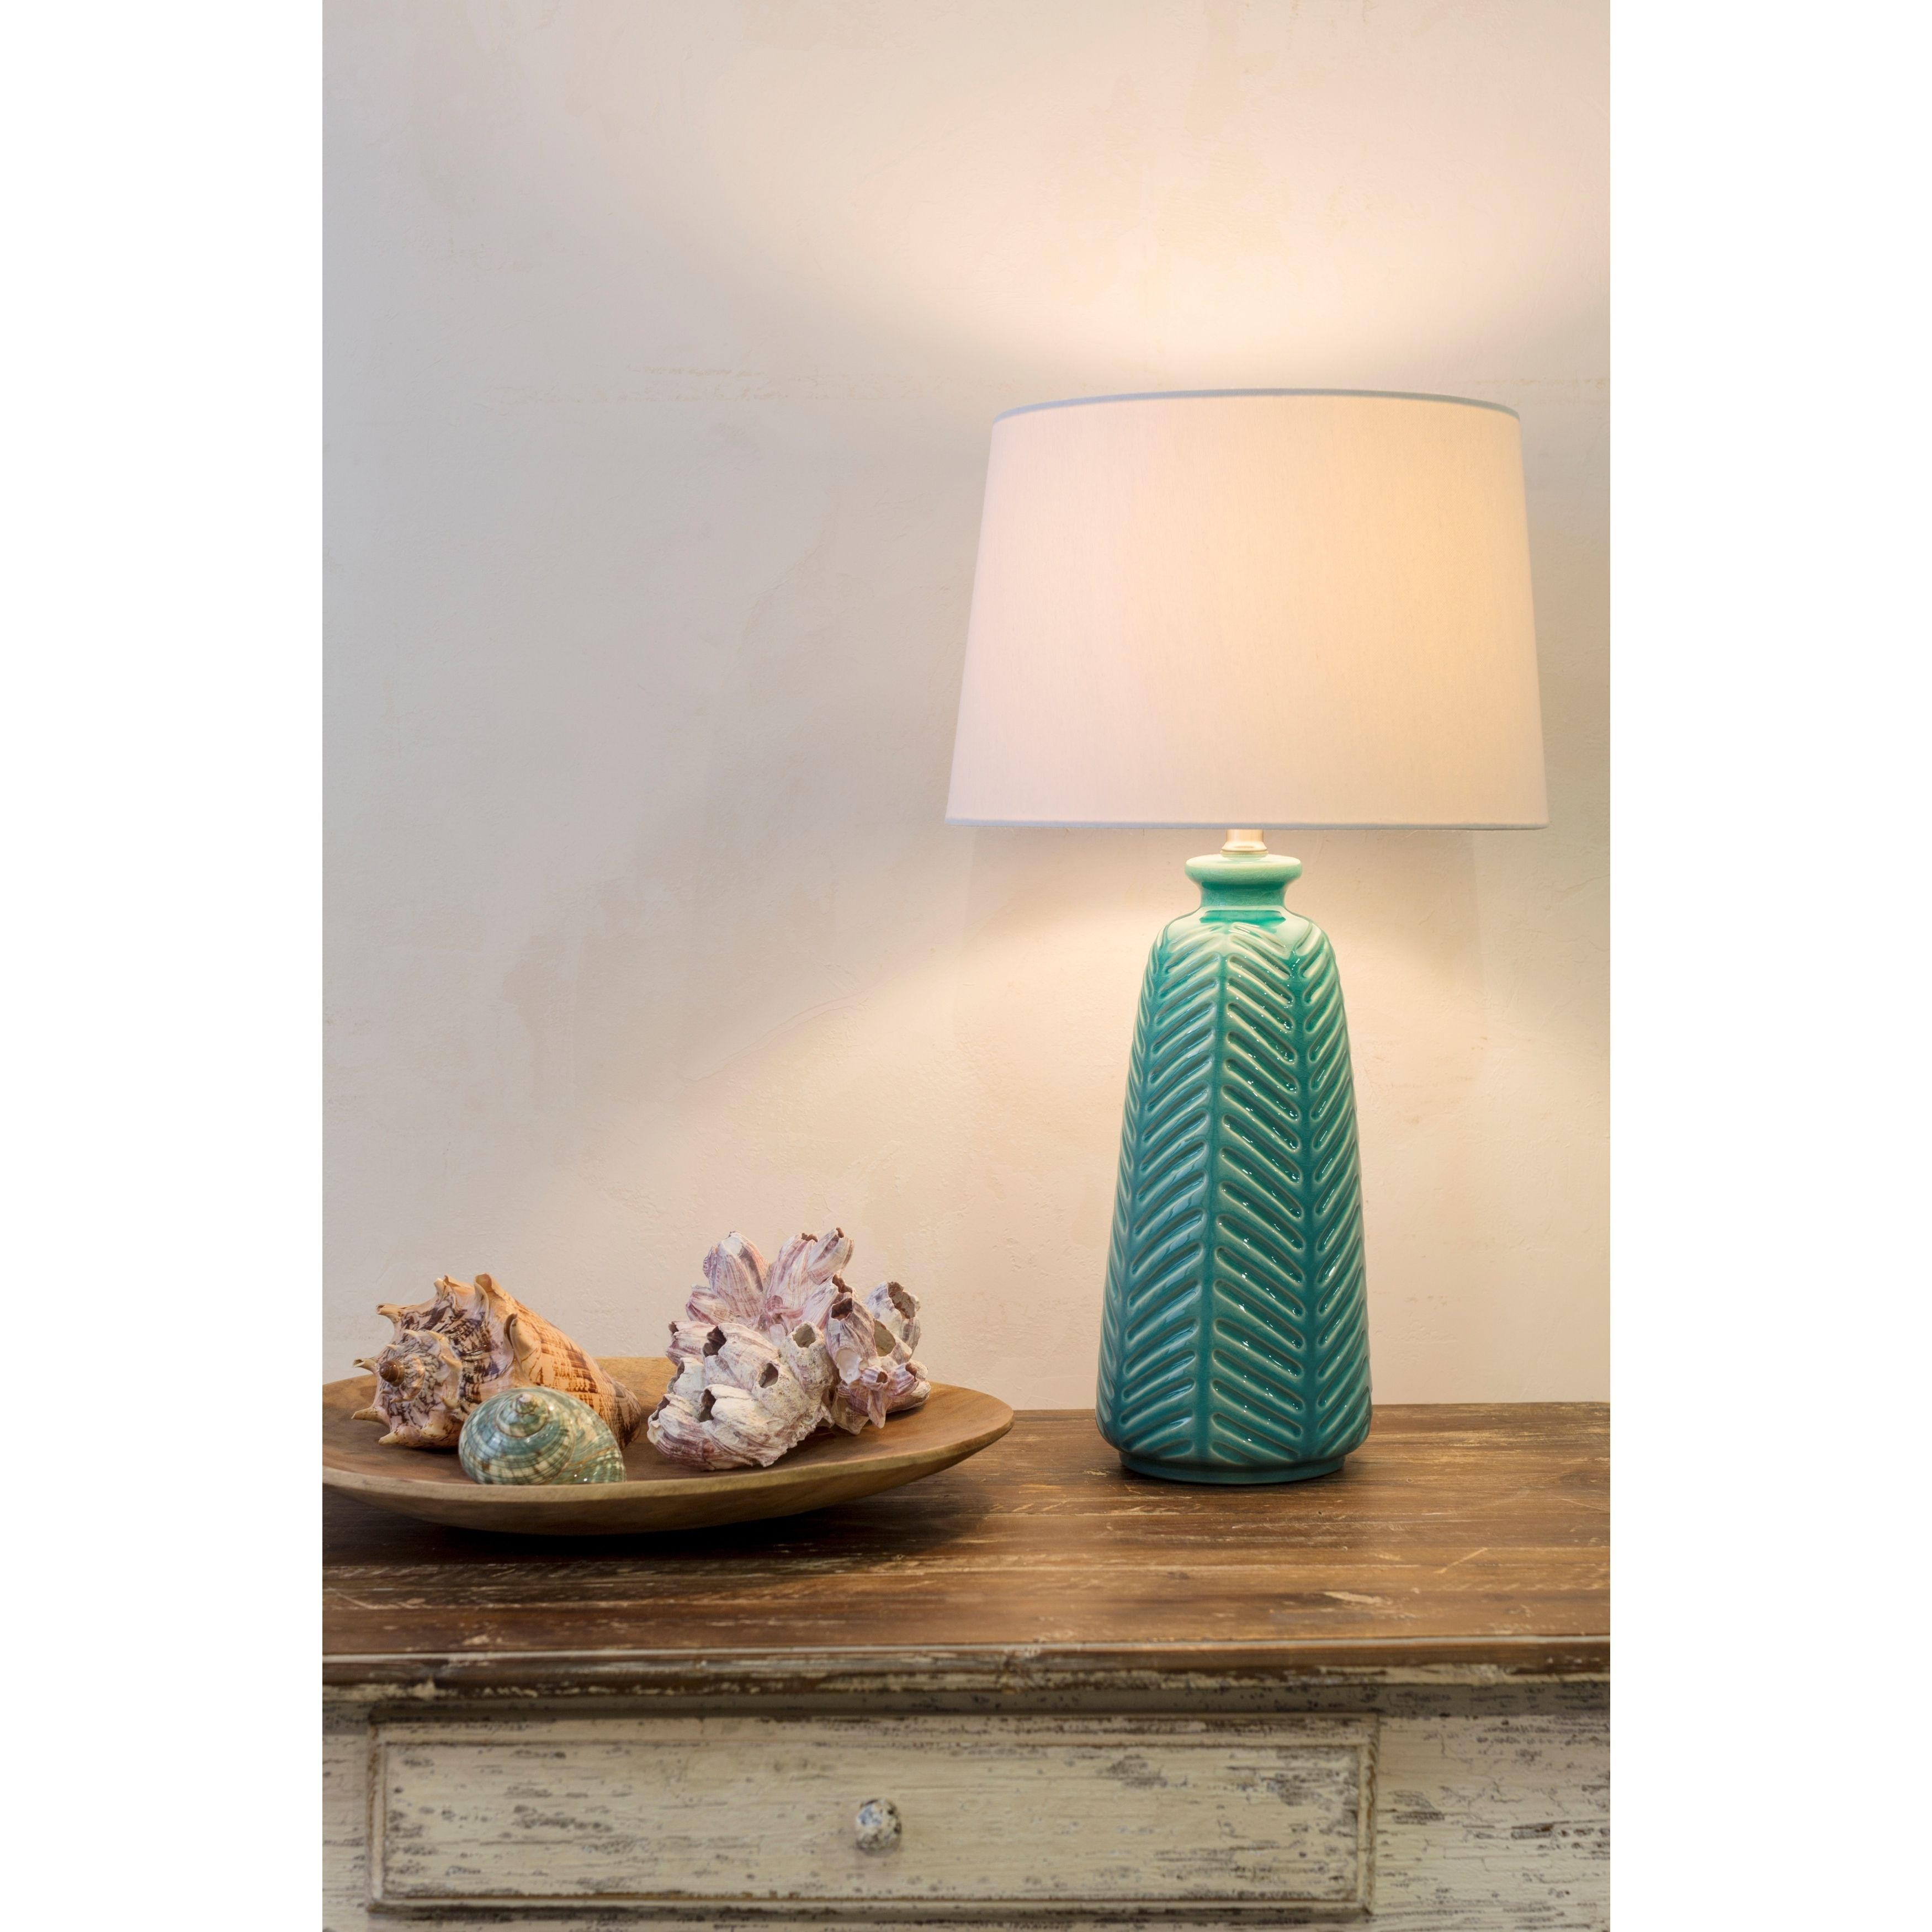 Rustic Jack Table Lamp With Glazed Ceramic Base In 2019 in sizing 3500 X 3500